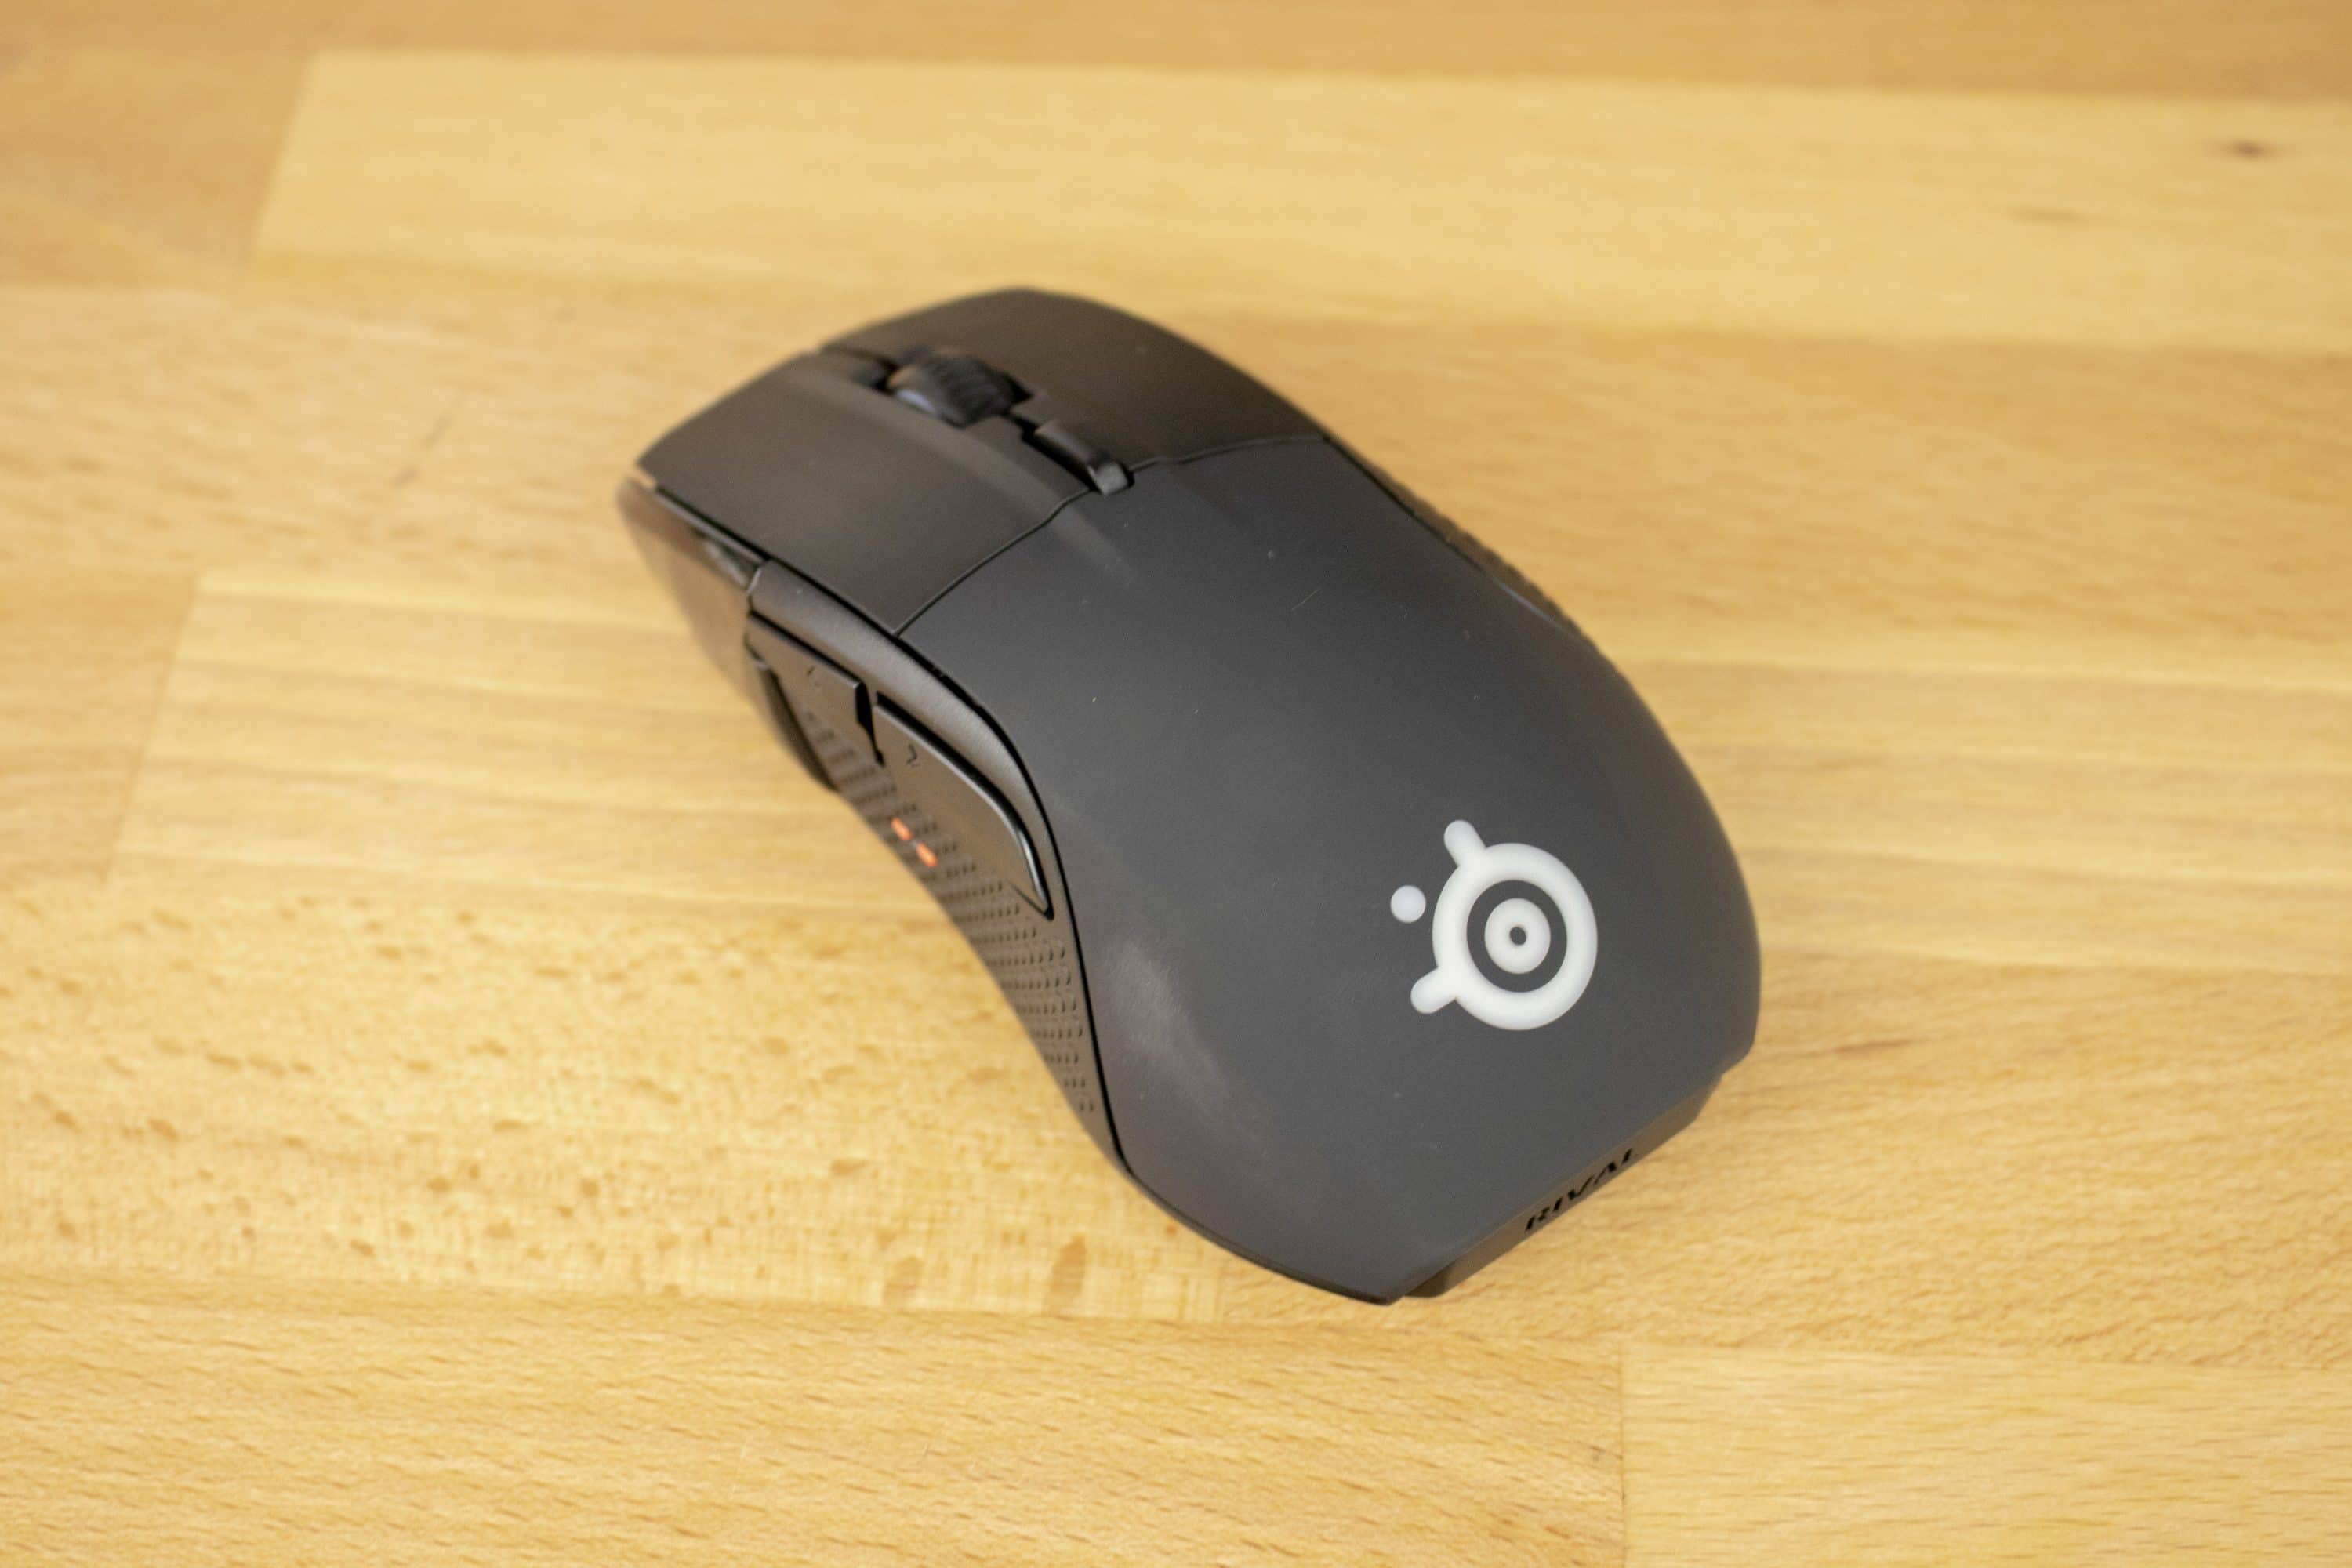 Steelseries Rival 710 Review - This Is What a Feature-Rich Gaming Mouse